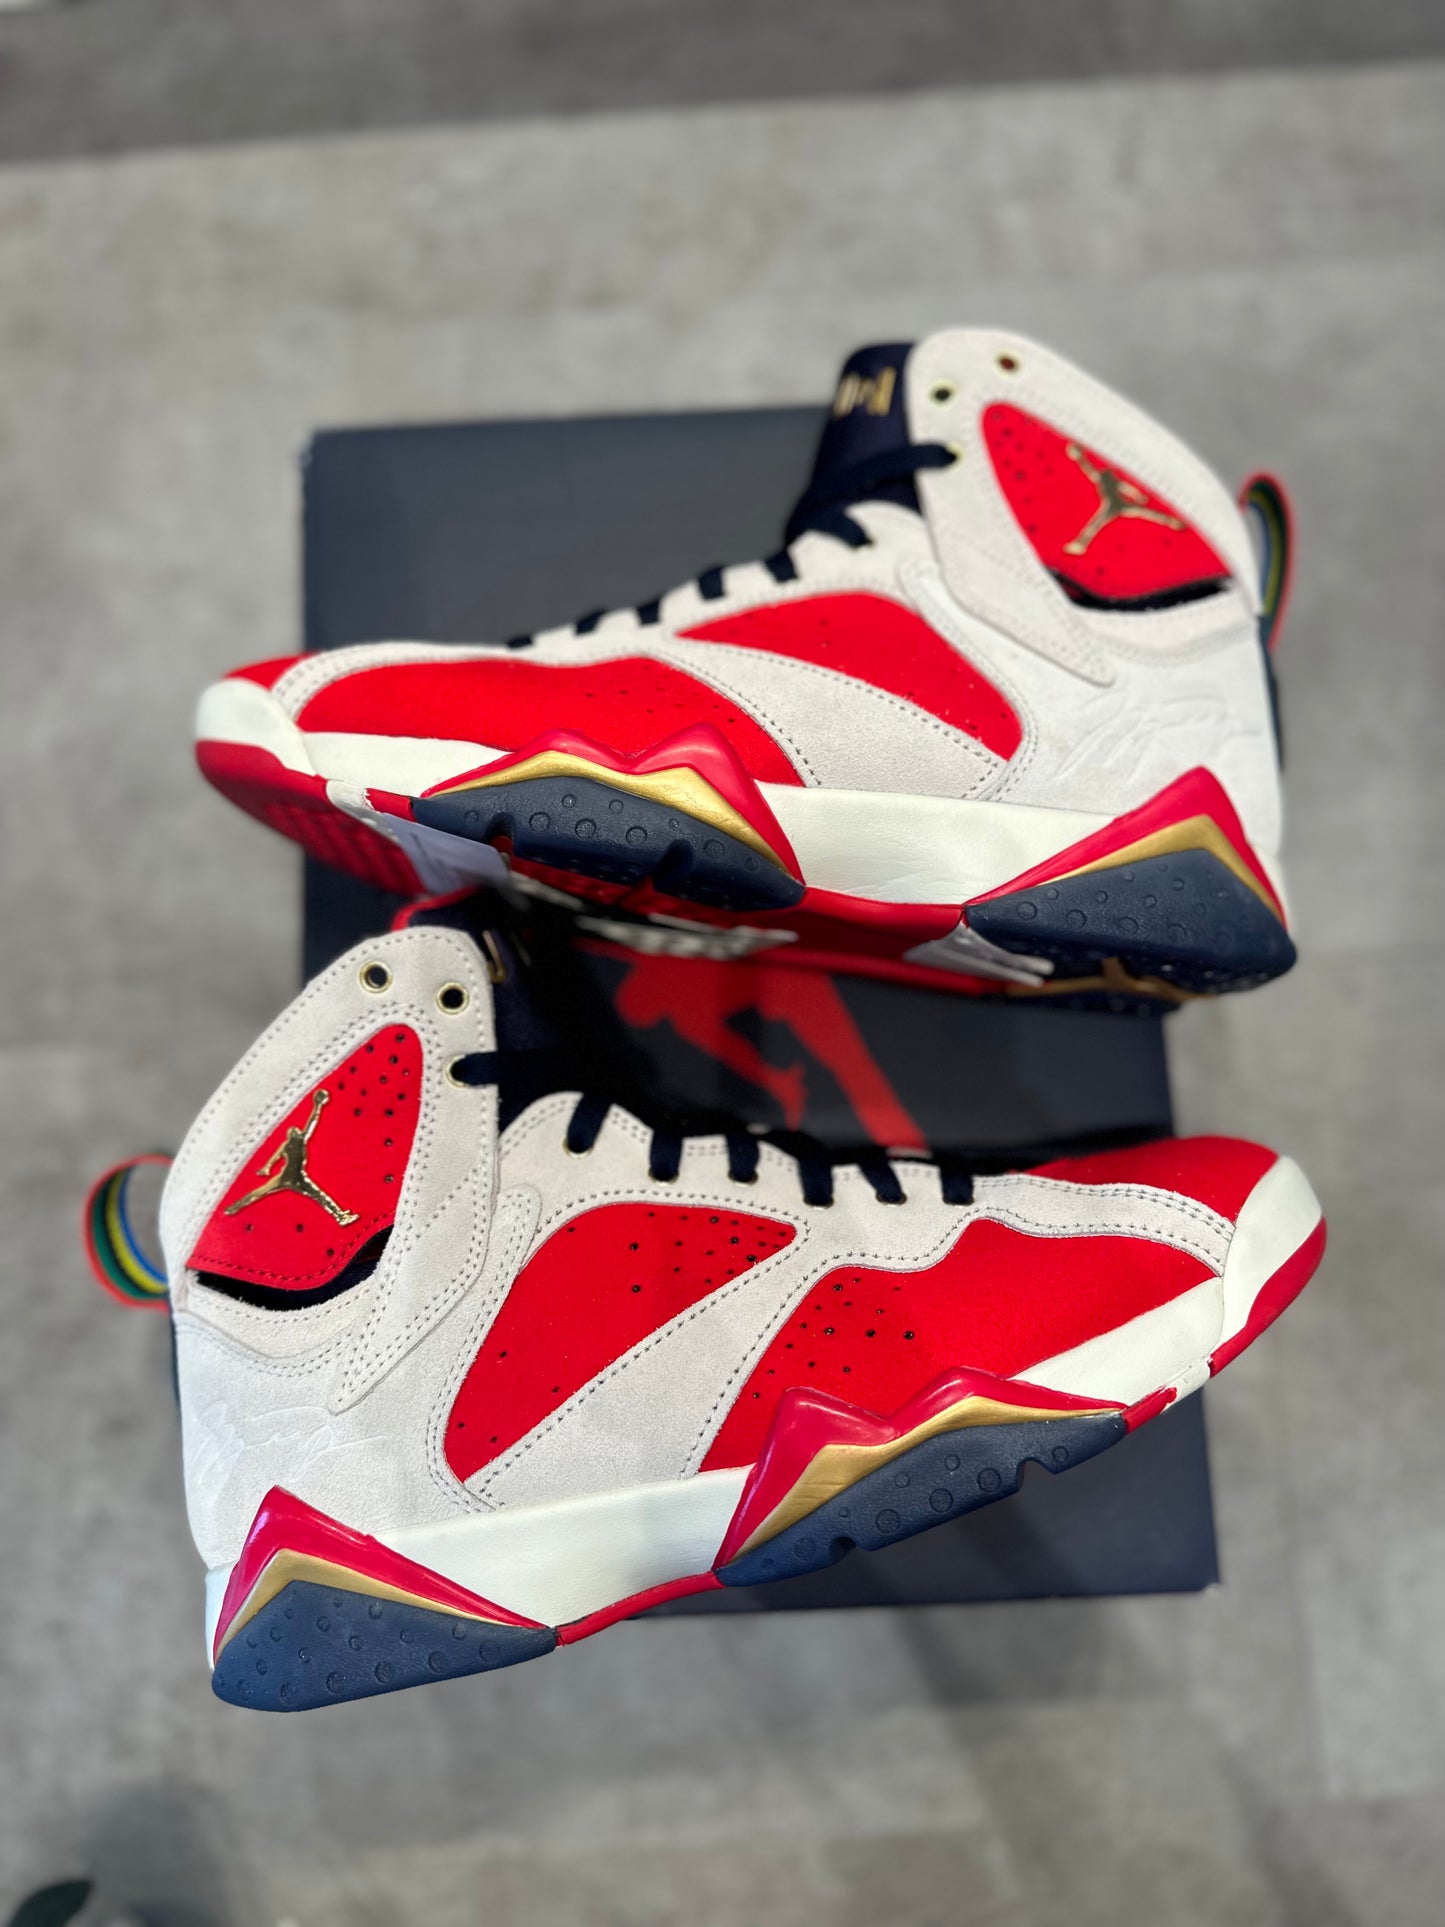 Jordan 7 Retro Trophy Room New Sheriff in Town (Preowned)